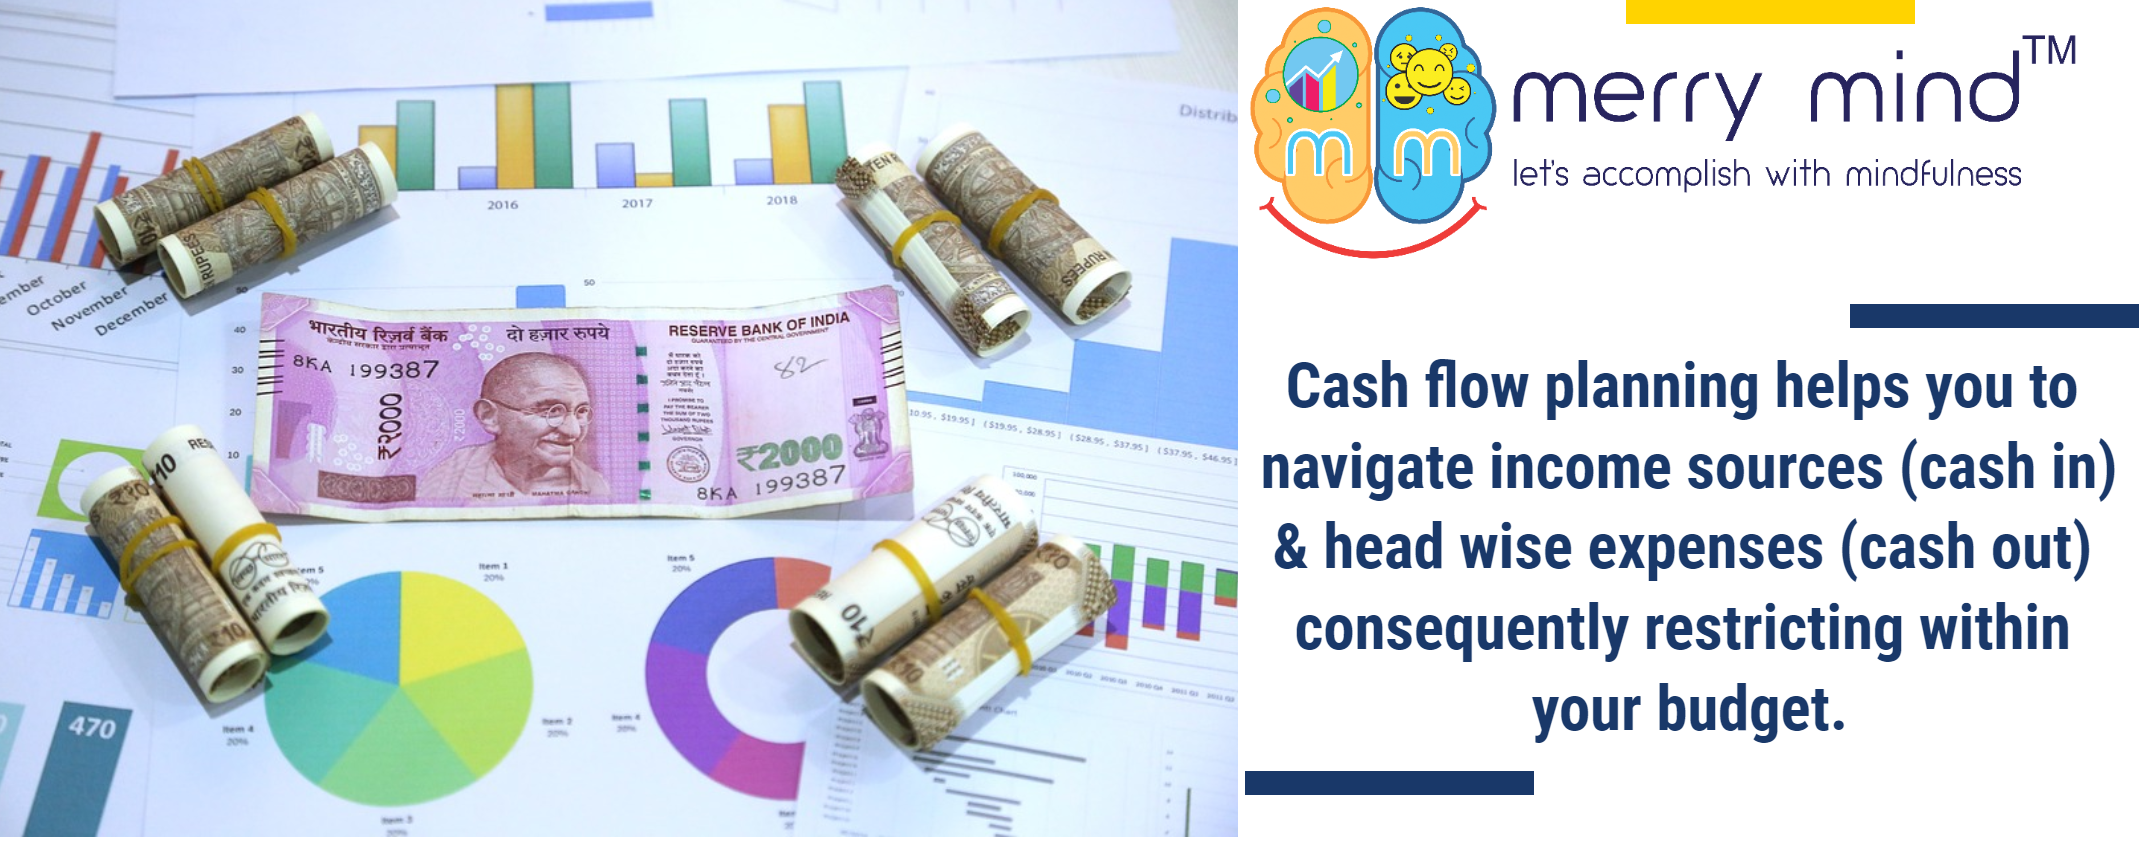 Cash flow statement will give you the idea of such expenses which you need to cut down